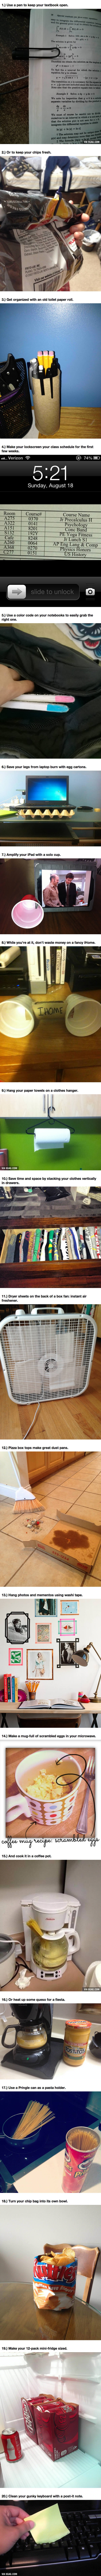 20 Genius College Hacks They Won't Teach You At Orientation